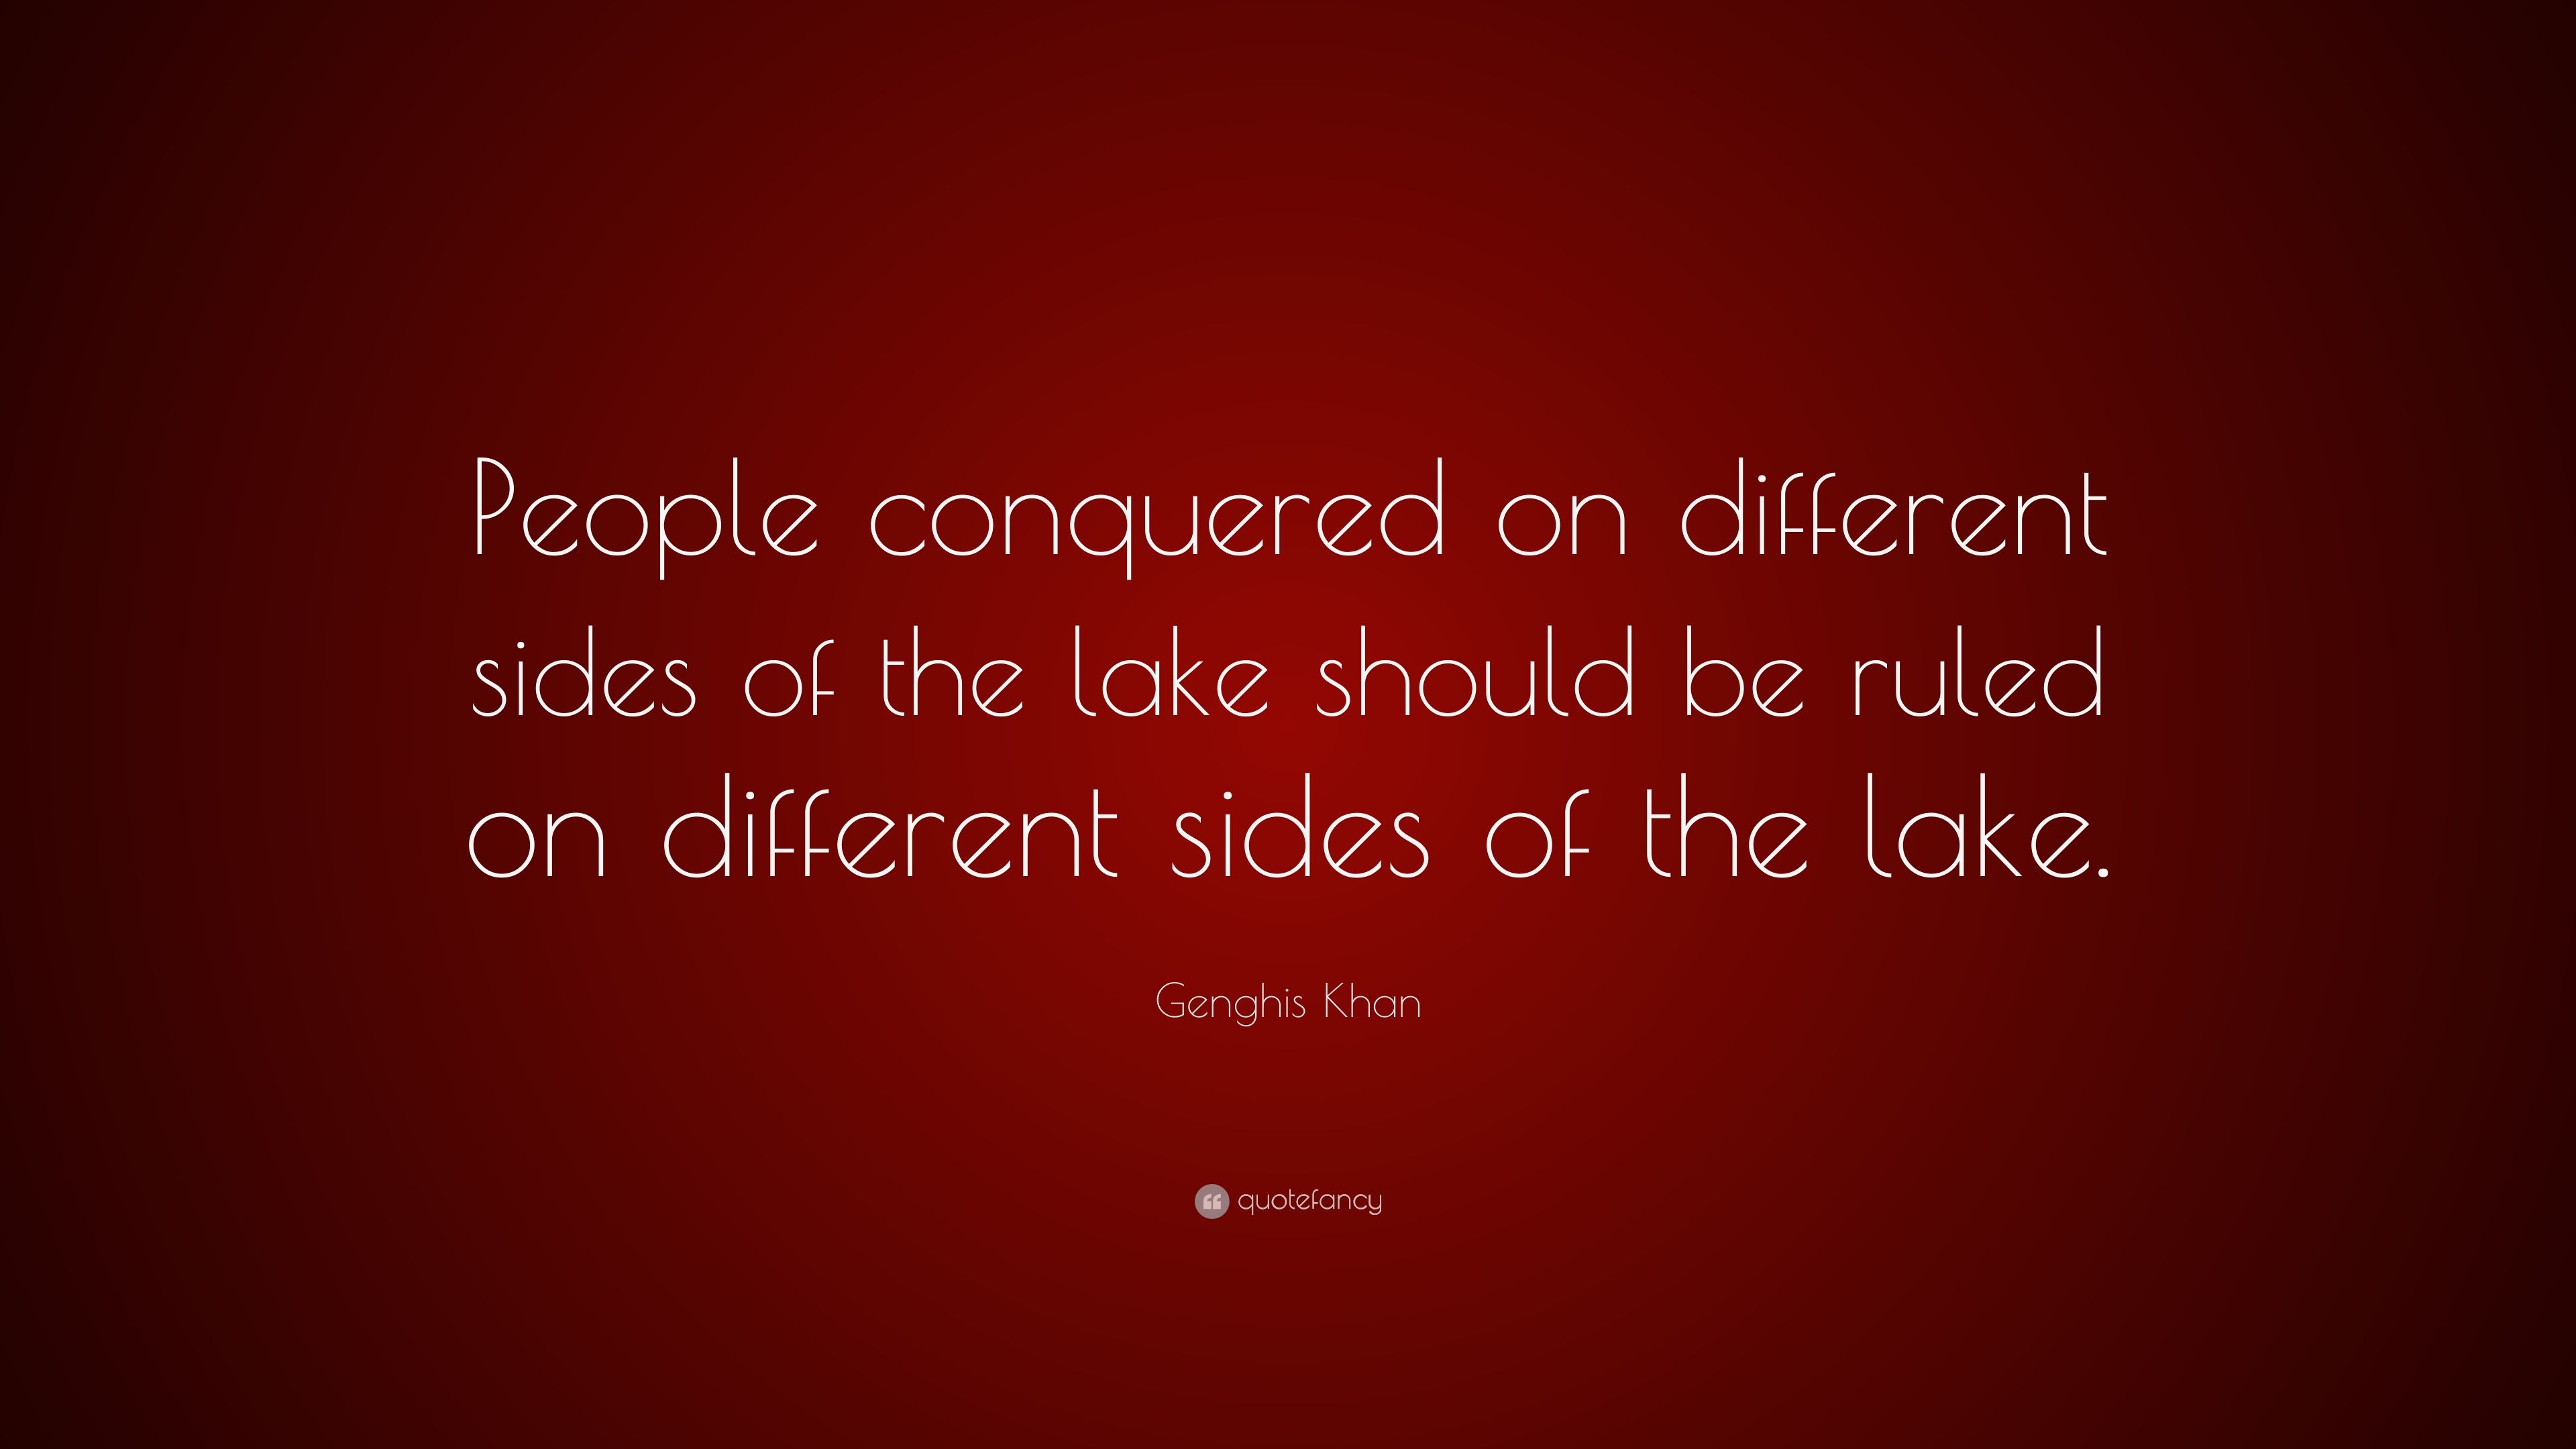 Genghis Khan Quote: “People conquered on different sides of the lake should be ruled on different sides of the lake.” (18 wallpaper)